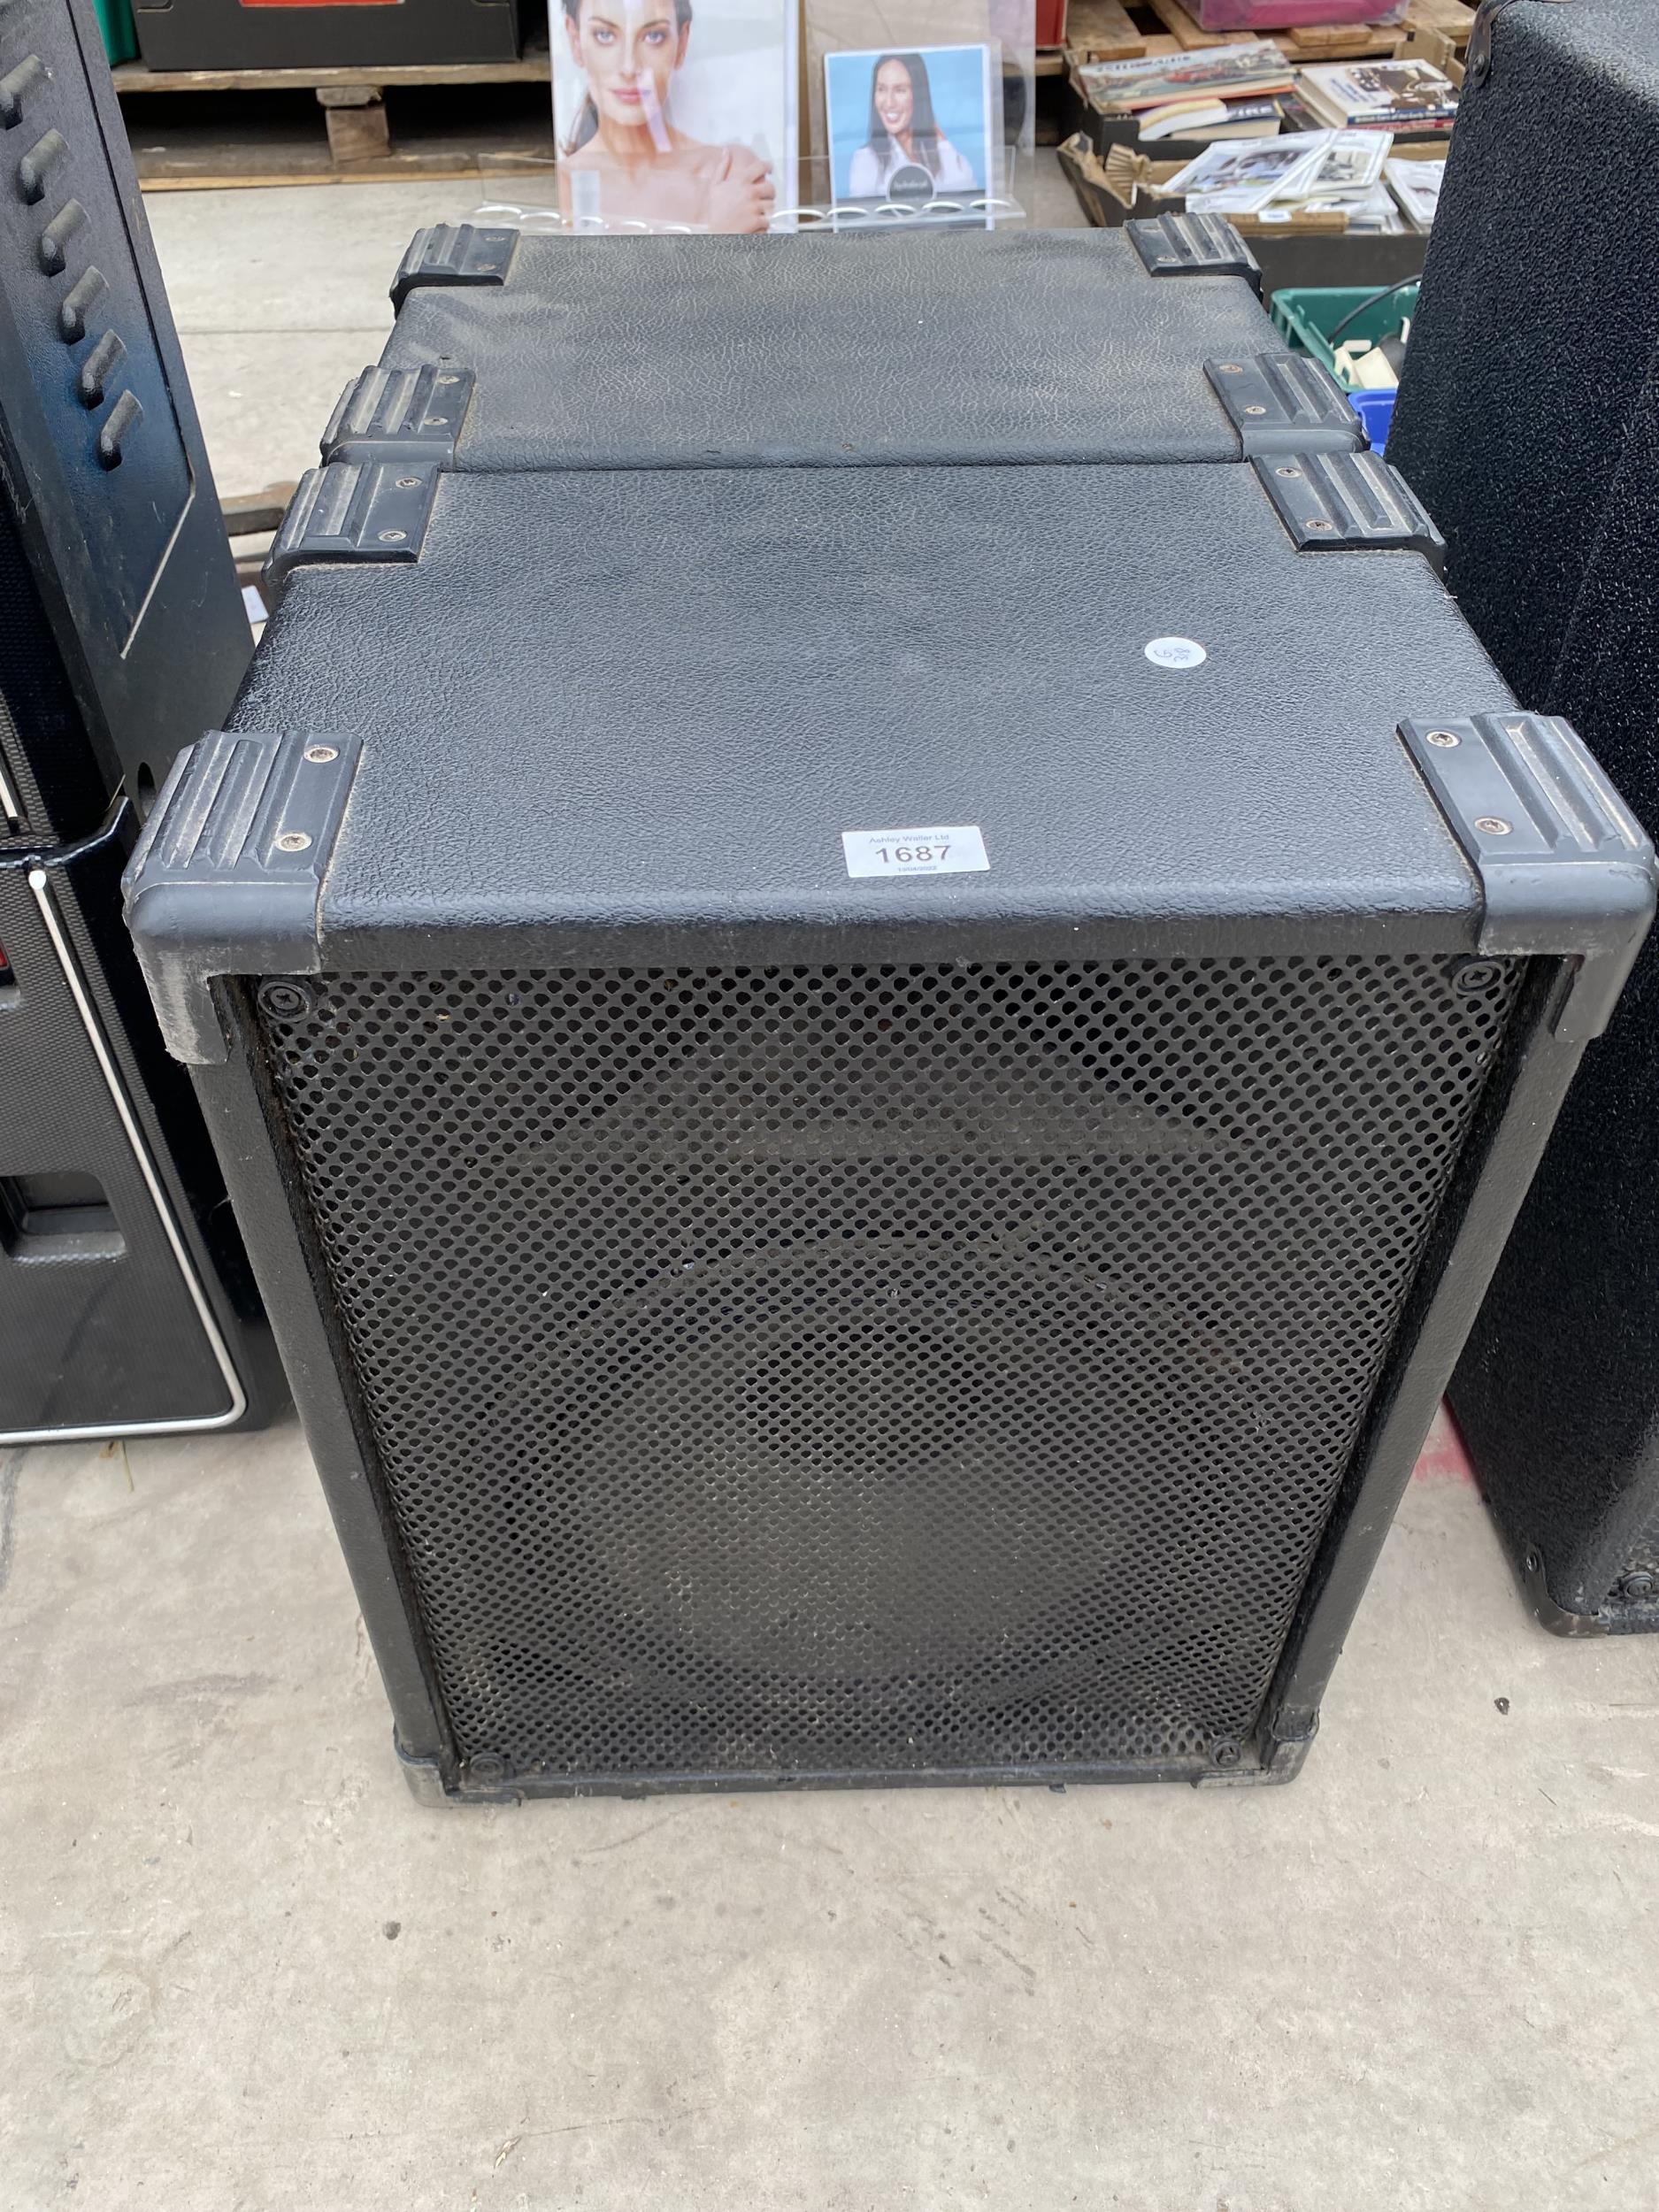 A PAIR OF LARGE SPEAKERS